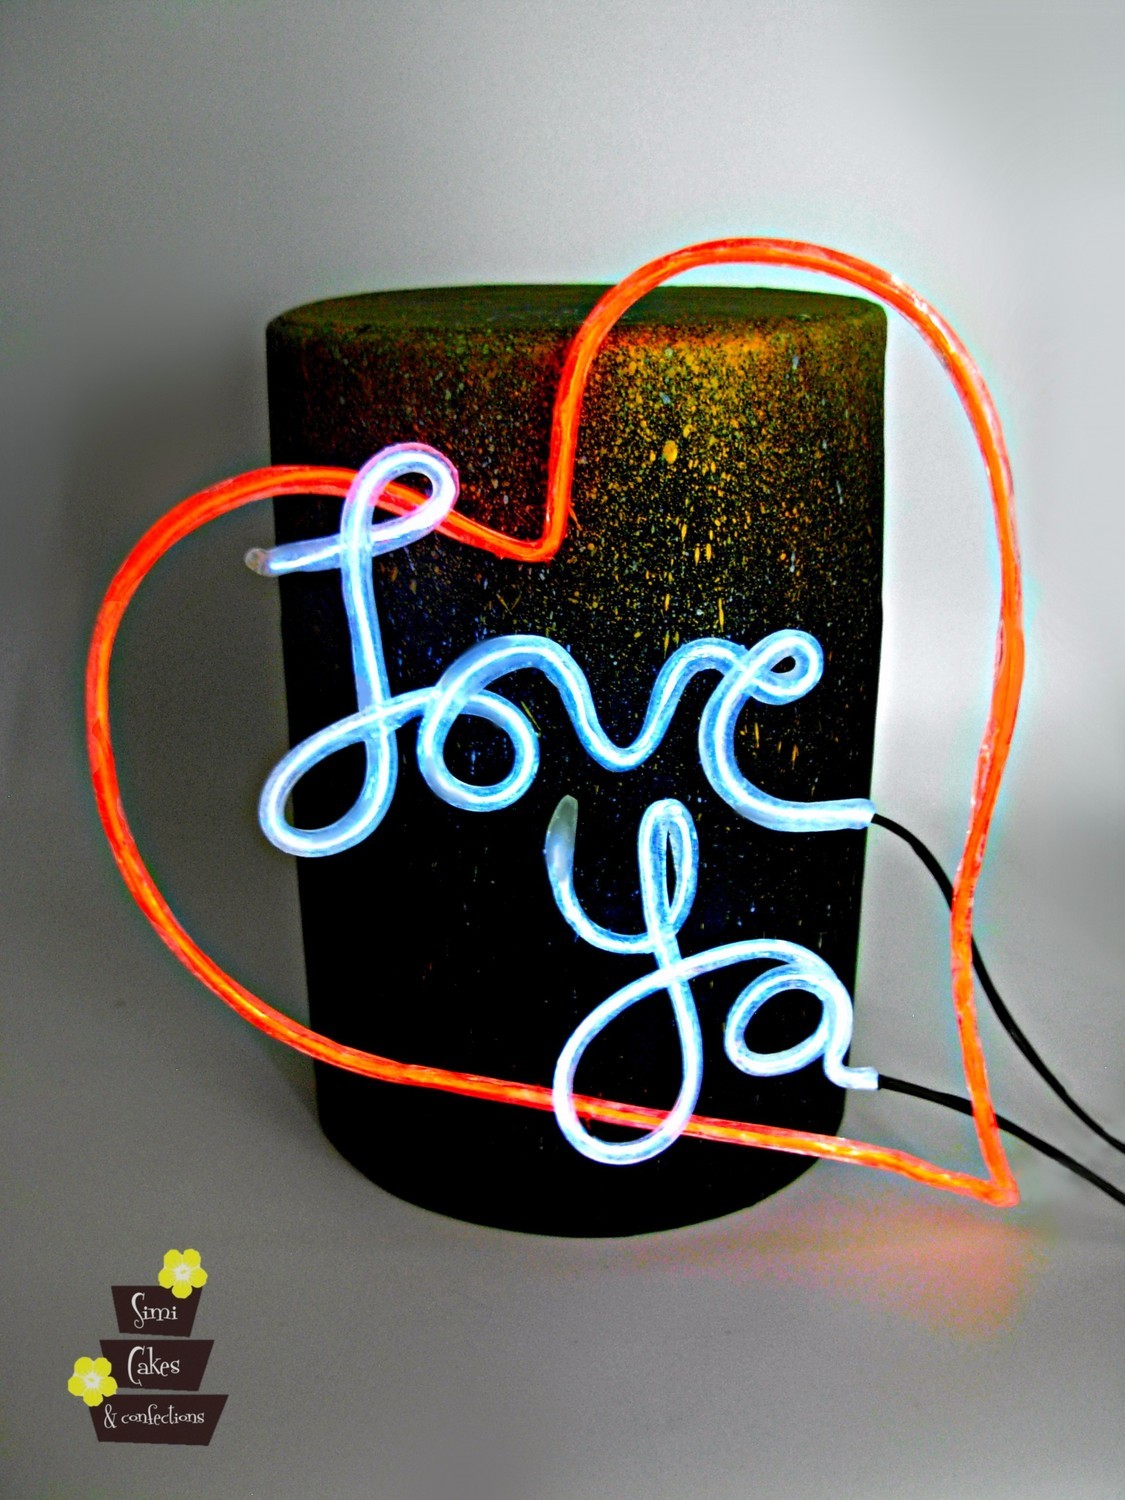 When SWEET ART meets Science! Isomalt Neon Sign-Class with Sidney Galpern from SimiCakes. NEW DATE TBA.